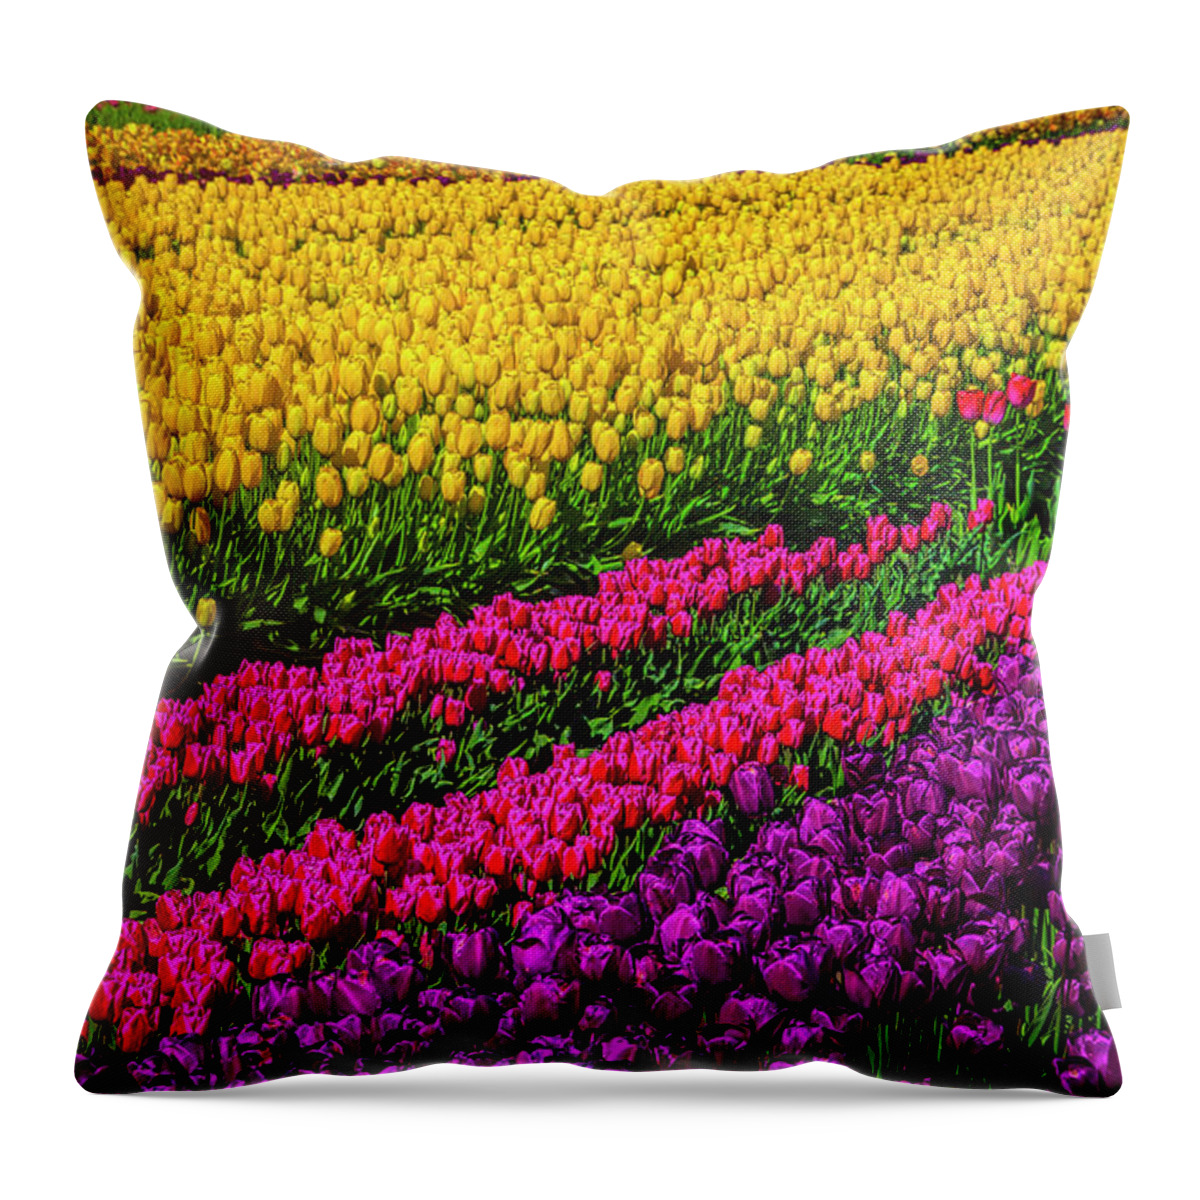 Tulip Throw Pillow featuring the photograph Colorful Rows Of Spring Tulips by Garry Gay